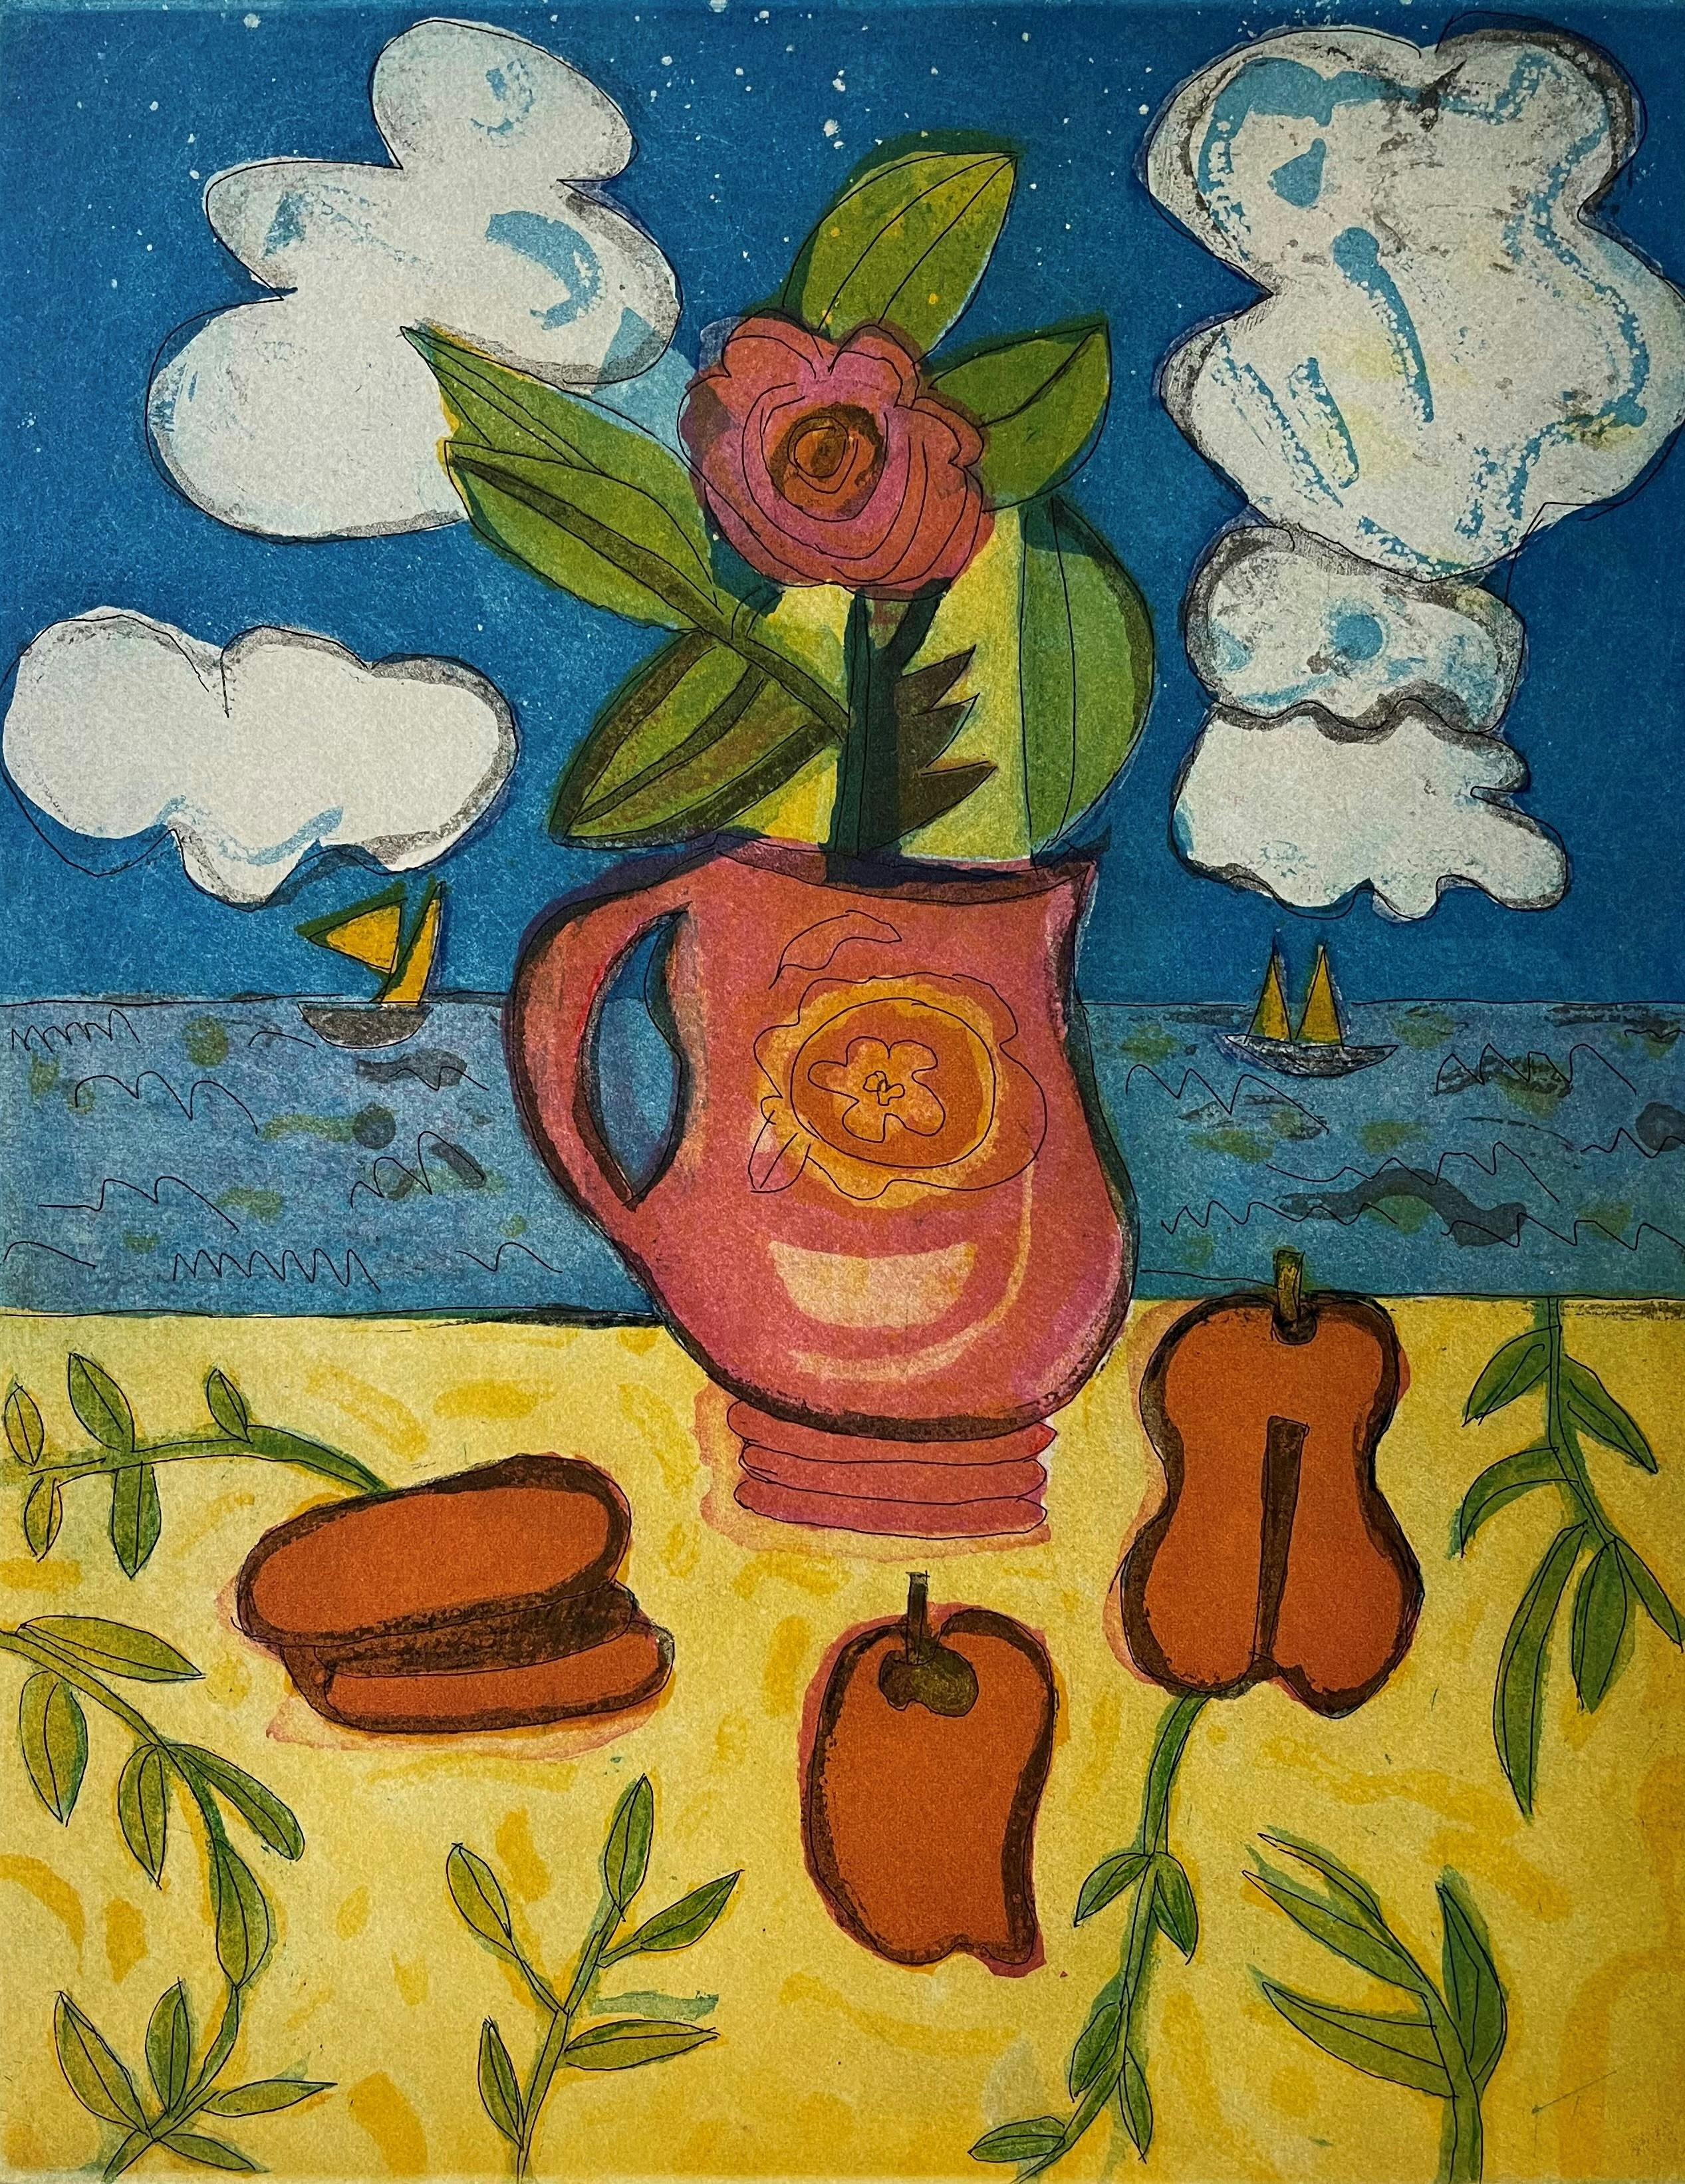 A painting of an abstracted flower vase and fruit